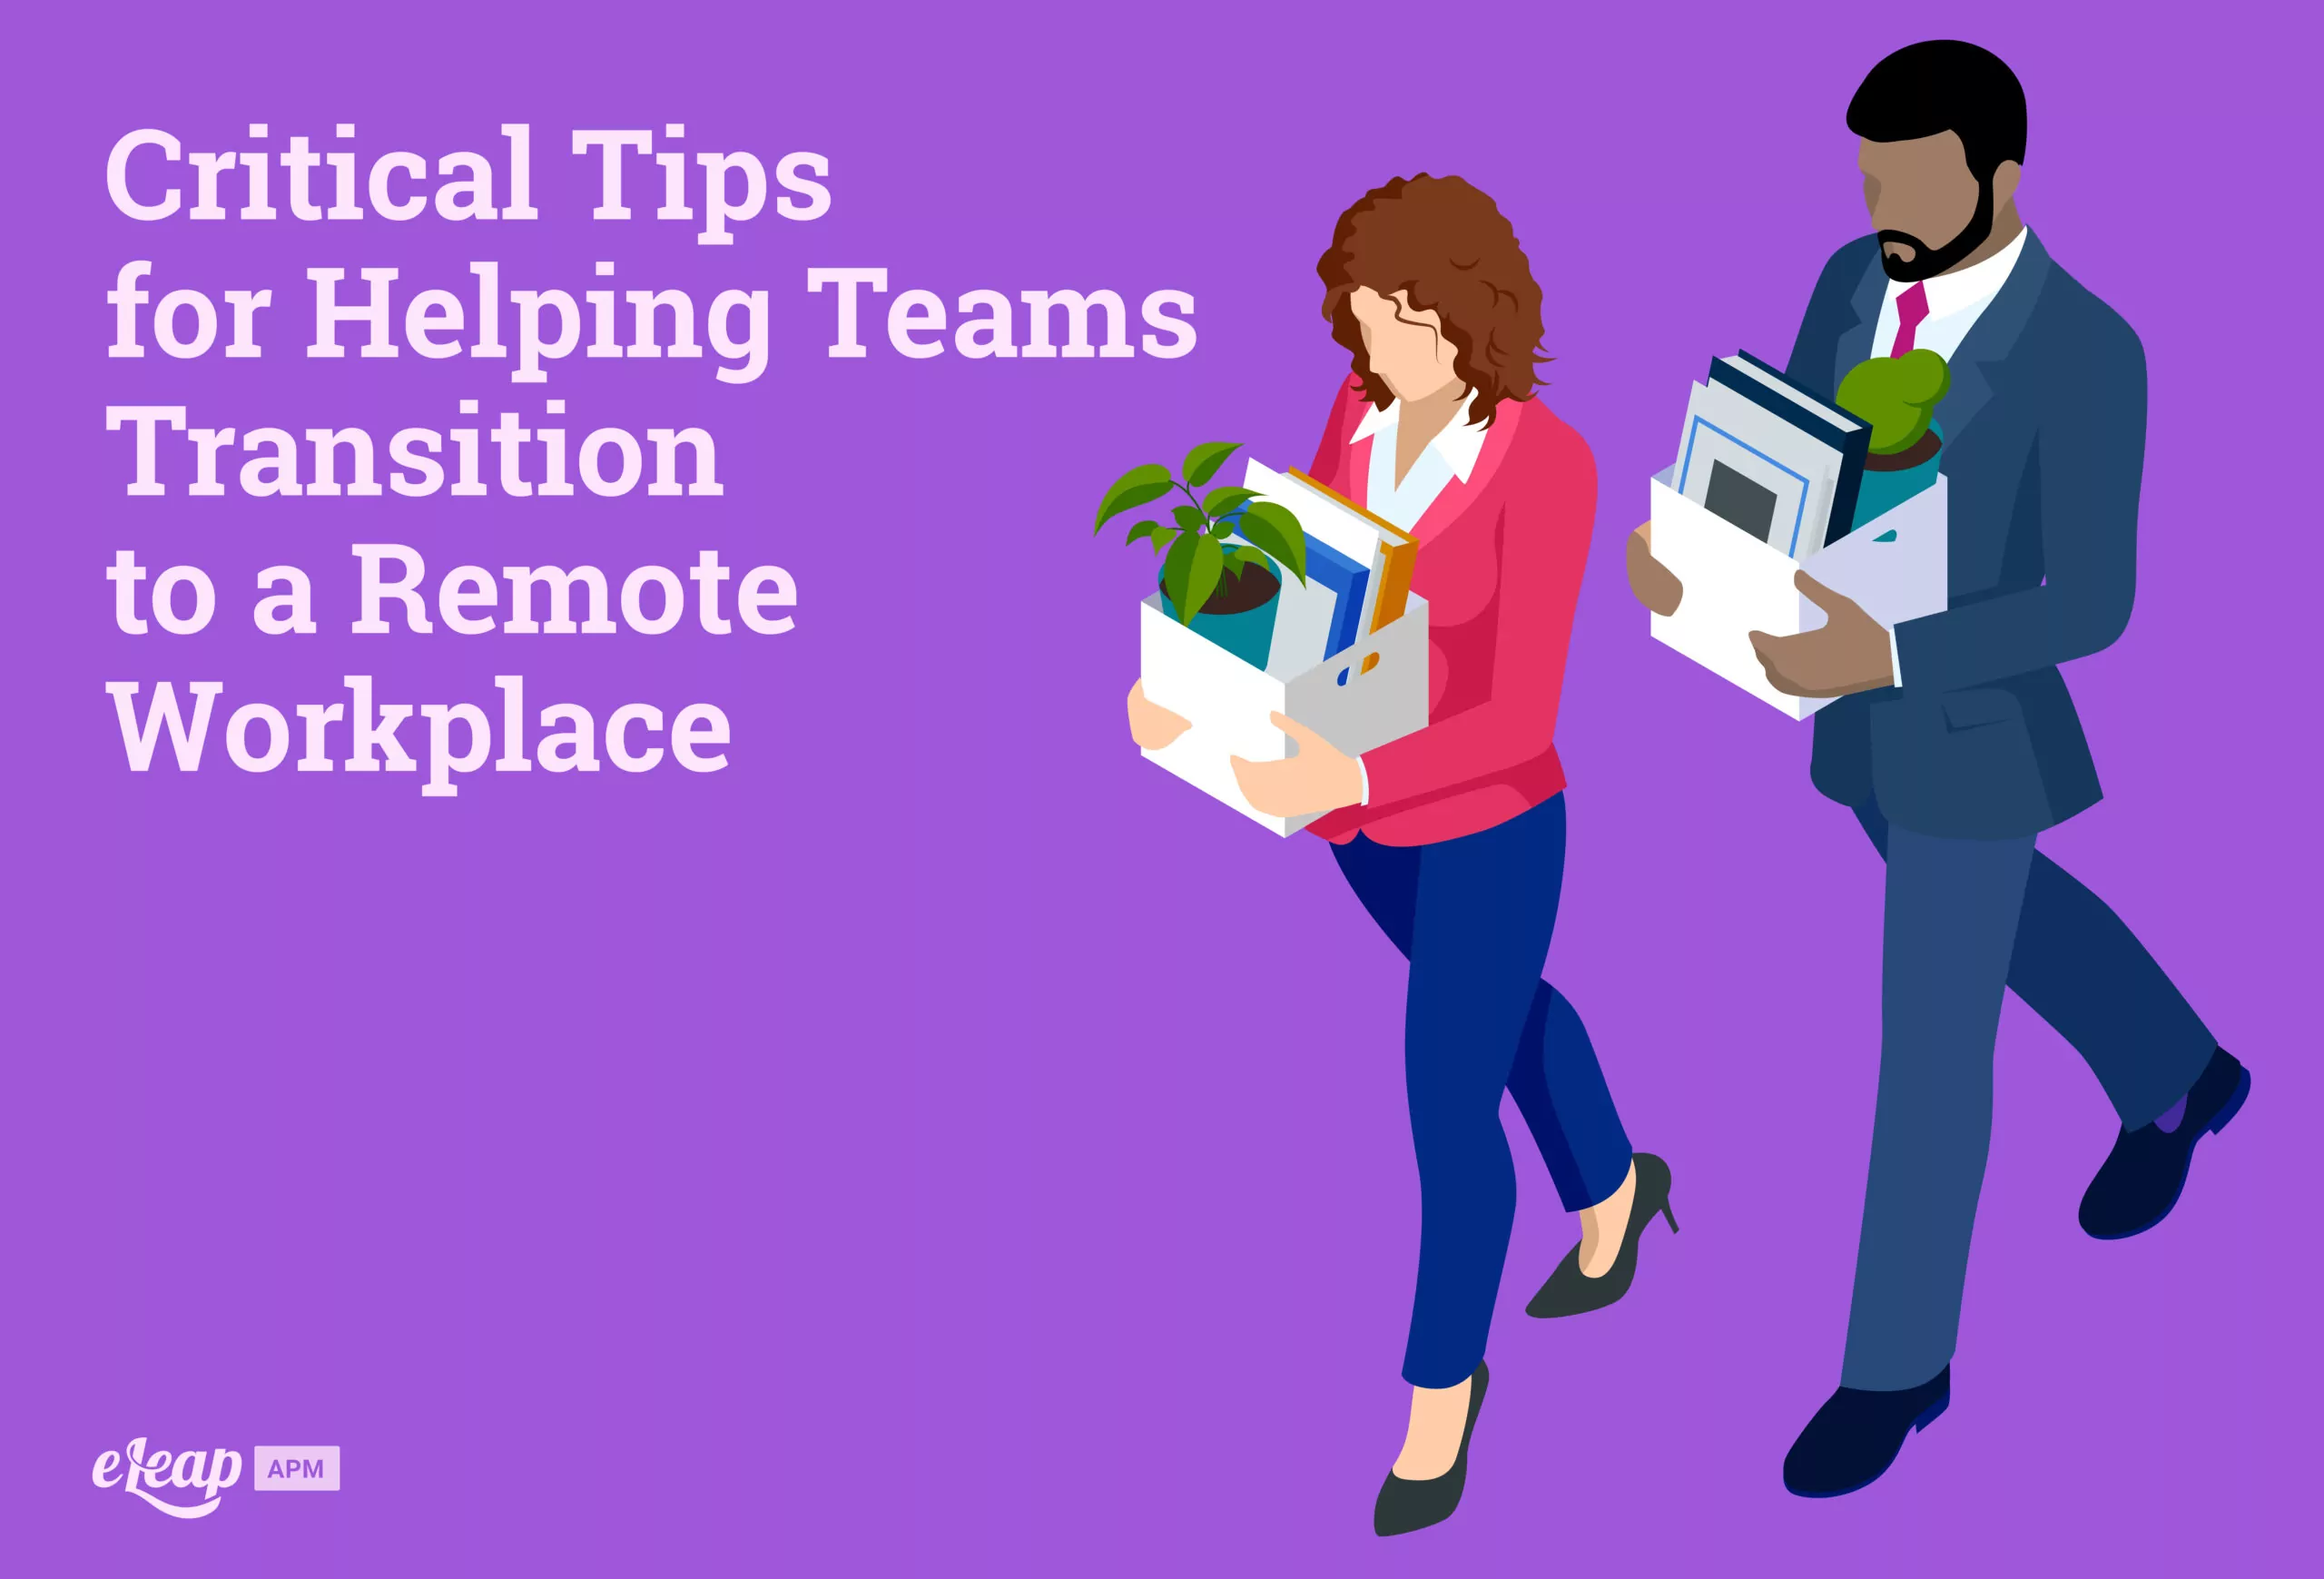 Critical Tips for Helping Teams Transition to a Remote Workplace